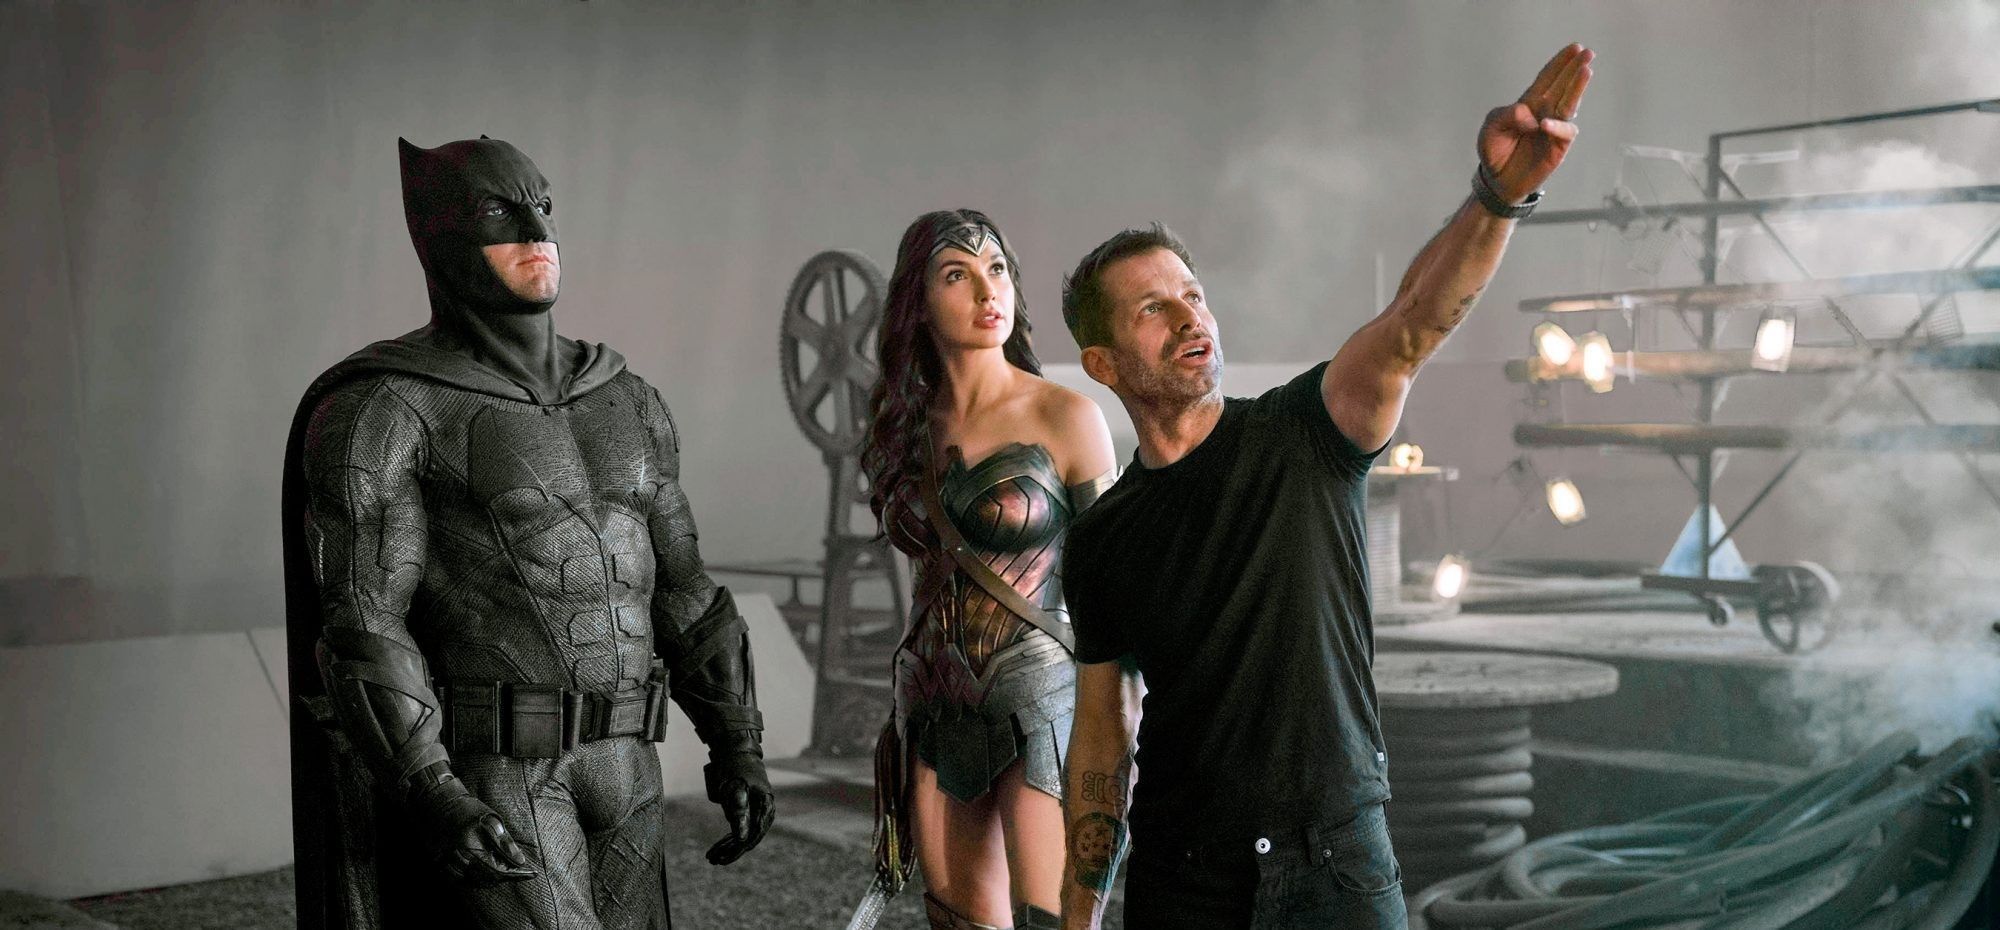 10 screenwriting tips from Zack Snyder